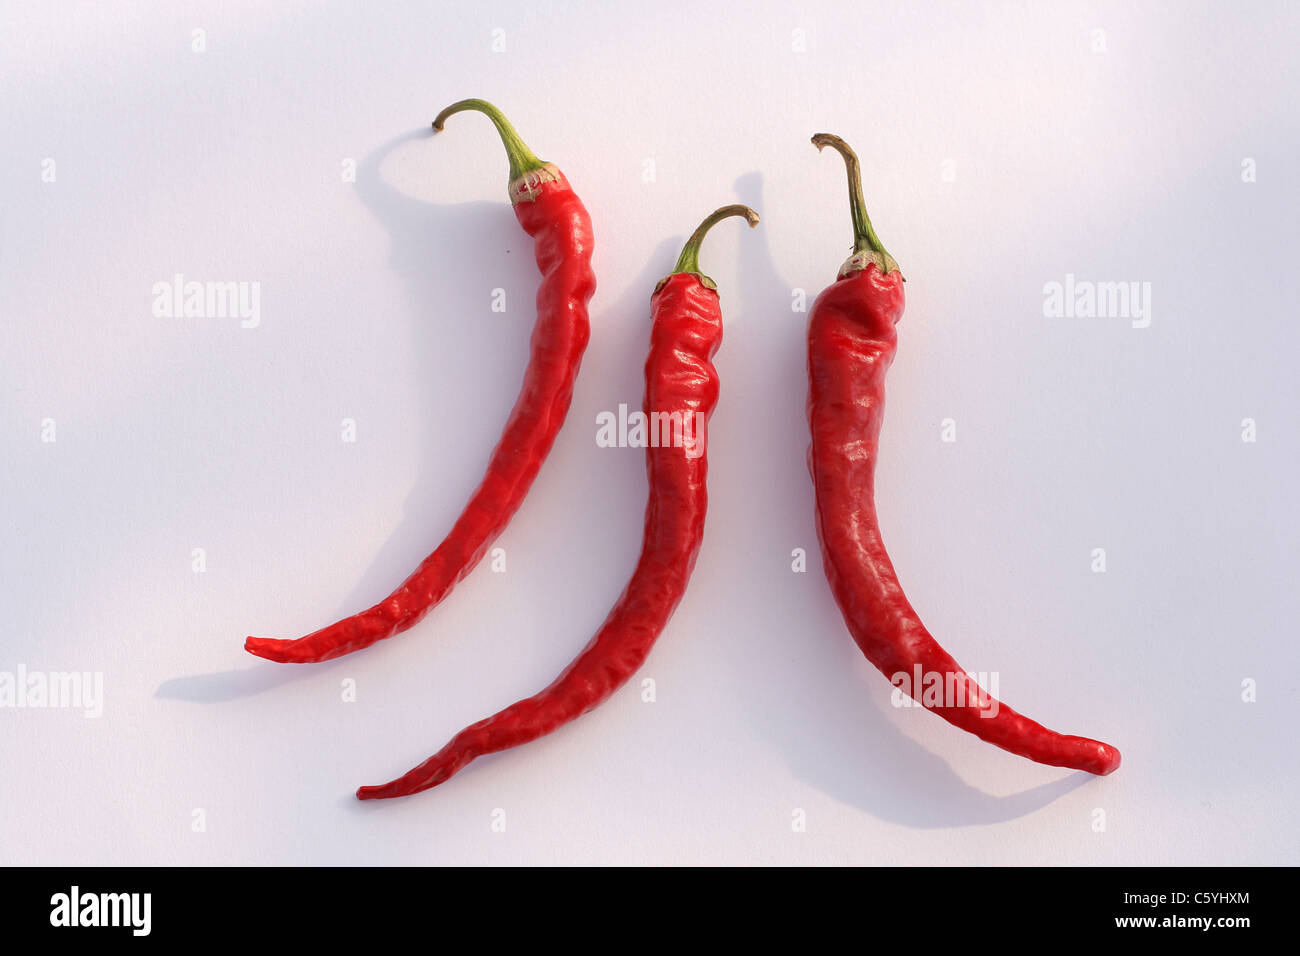 Pimento, cayenne red pepper along (Capsicum annuum). Stock Photo